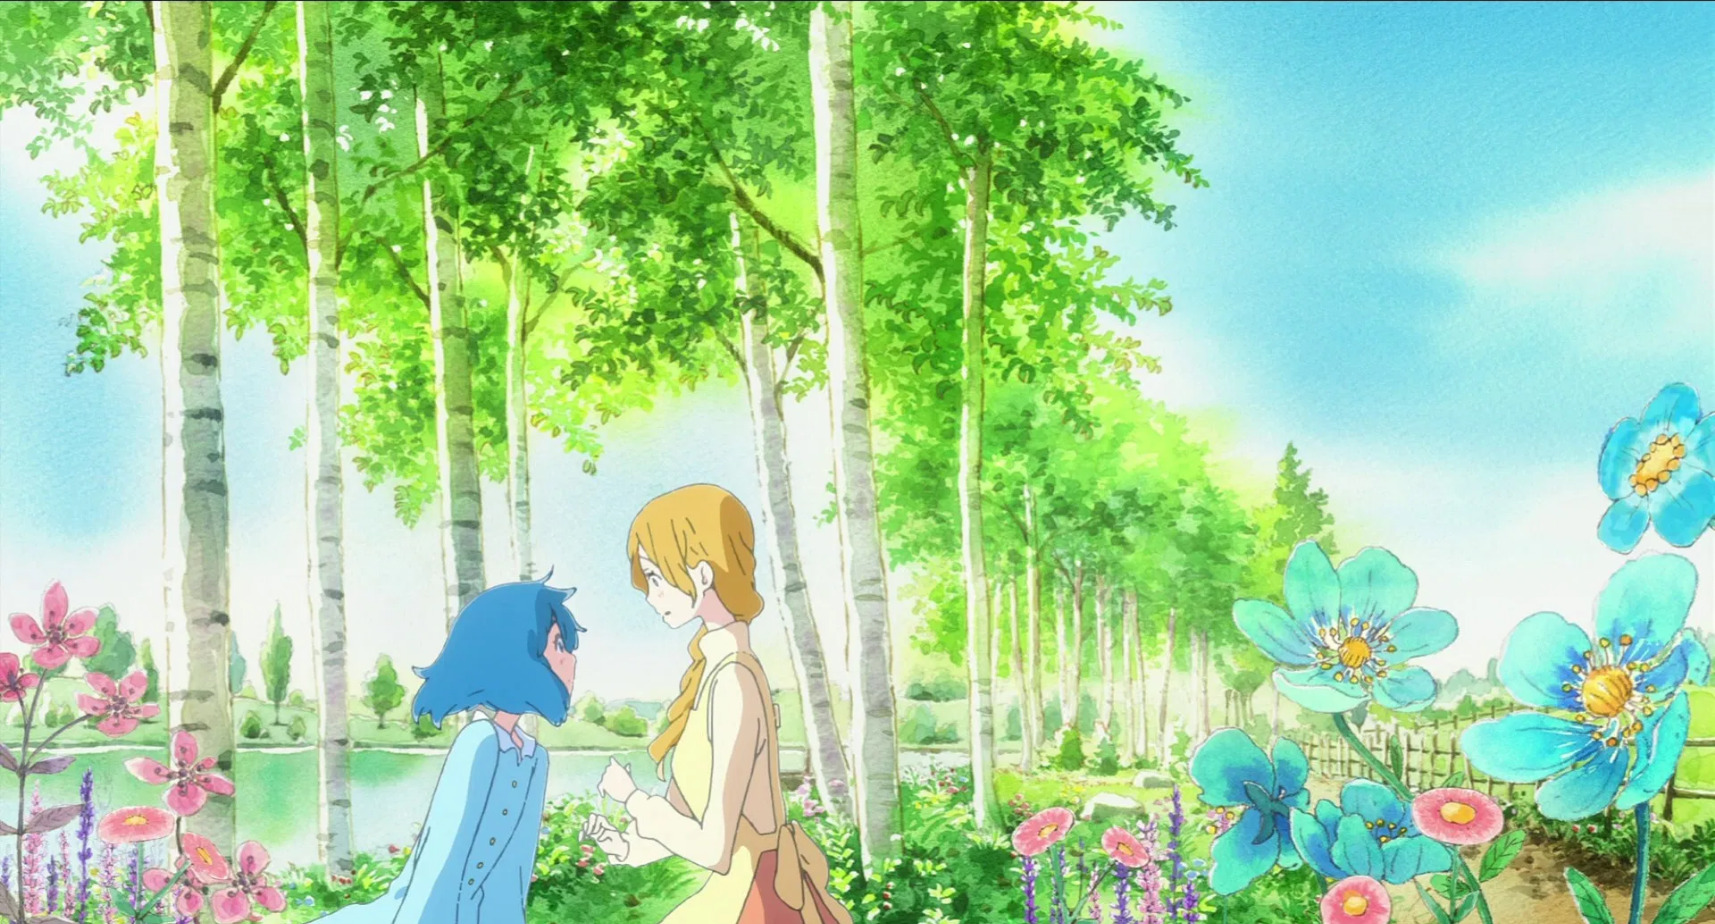 Liz, a blonde girl with a long braid, talking to the blue bird in the form of a blue girl by a row of trees painted with watercolors. Blue flowers bloom in the foreground.